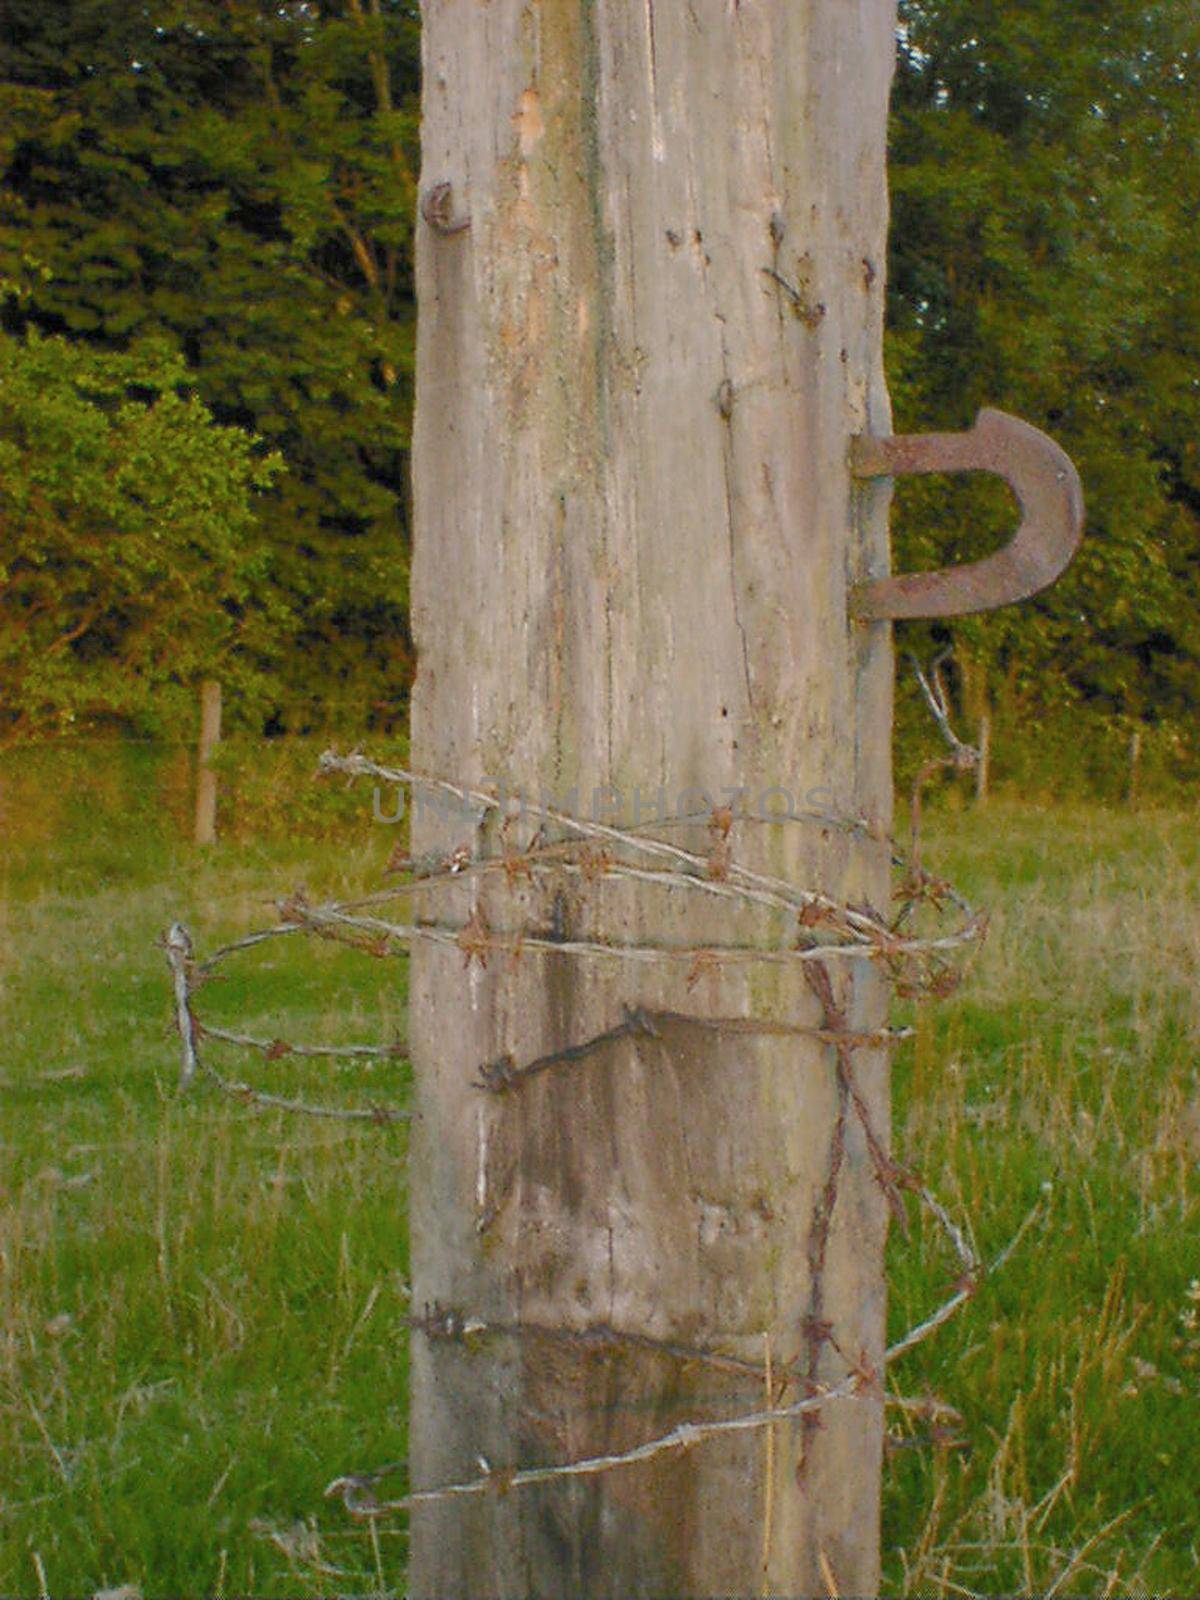 Barbed wire fence post with strands of old wire wrapped around a wooden pole with a metal latch or attachment hook in a country field